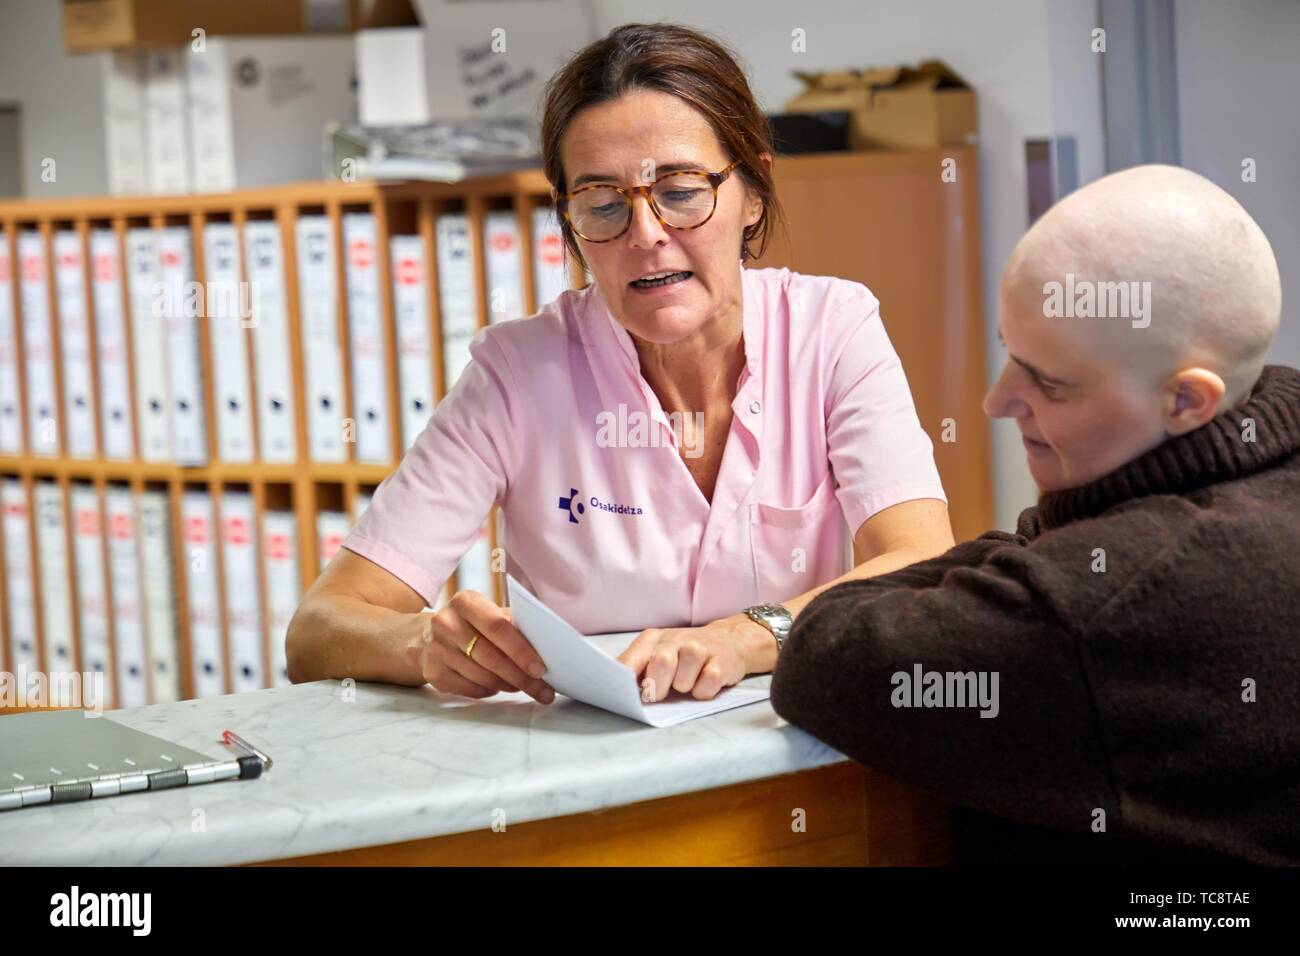 Nursing assistant attends cancer patient in hospital reception, Oncology, Hospital Donostia, San Sebastian, Gipuzkoa, Basque Country, Spain Stock Photo